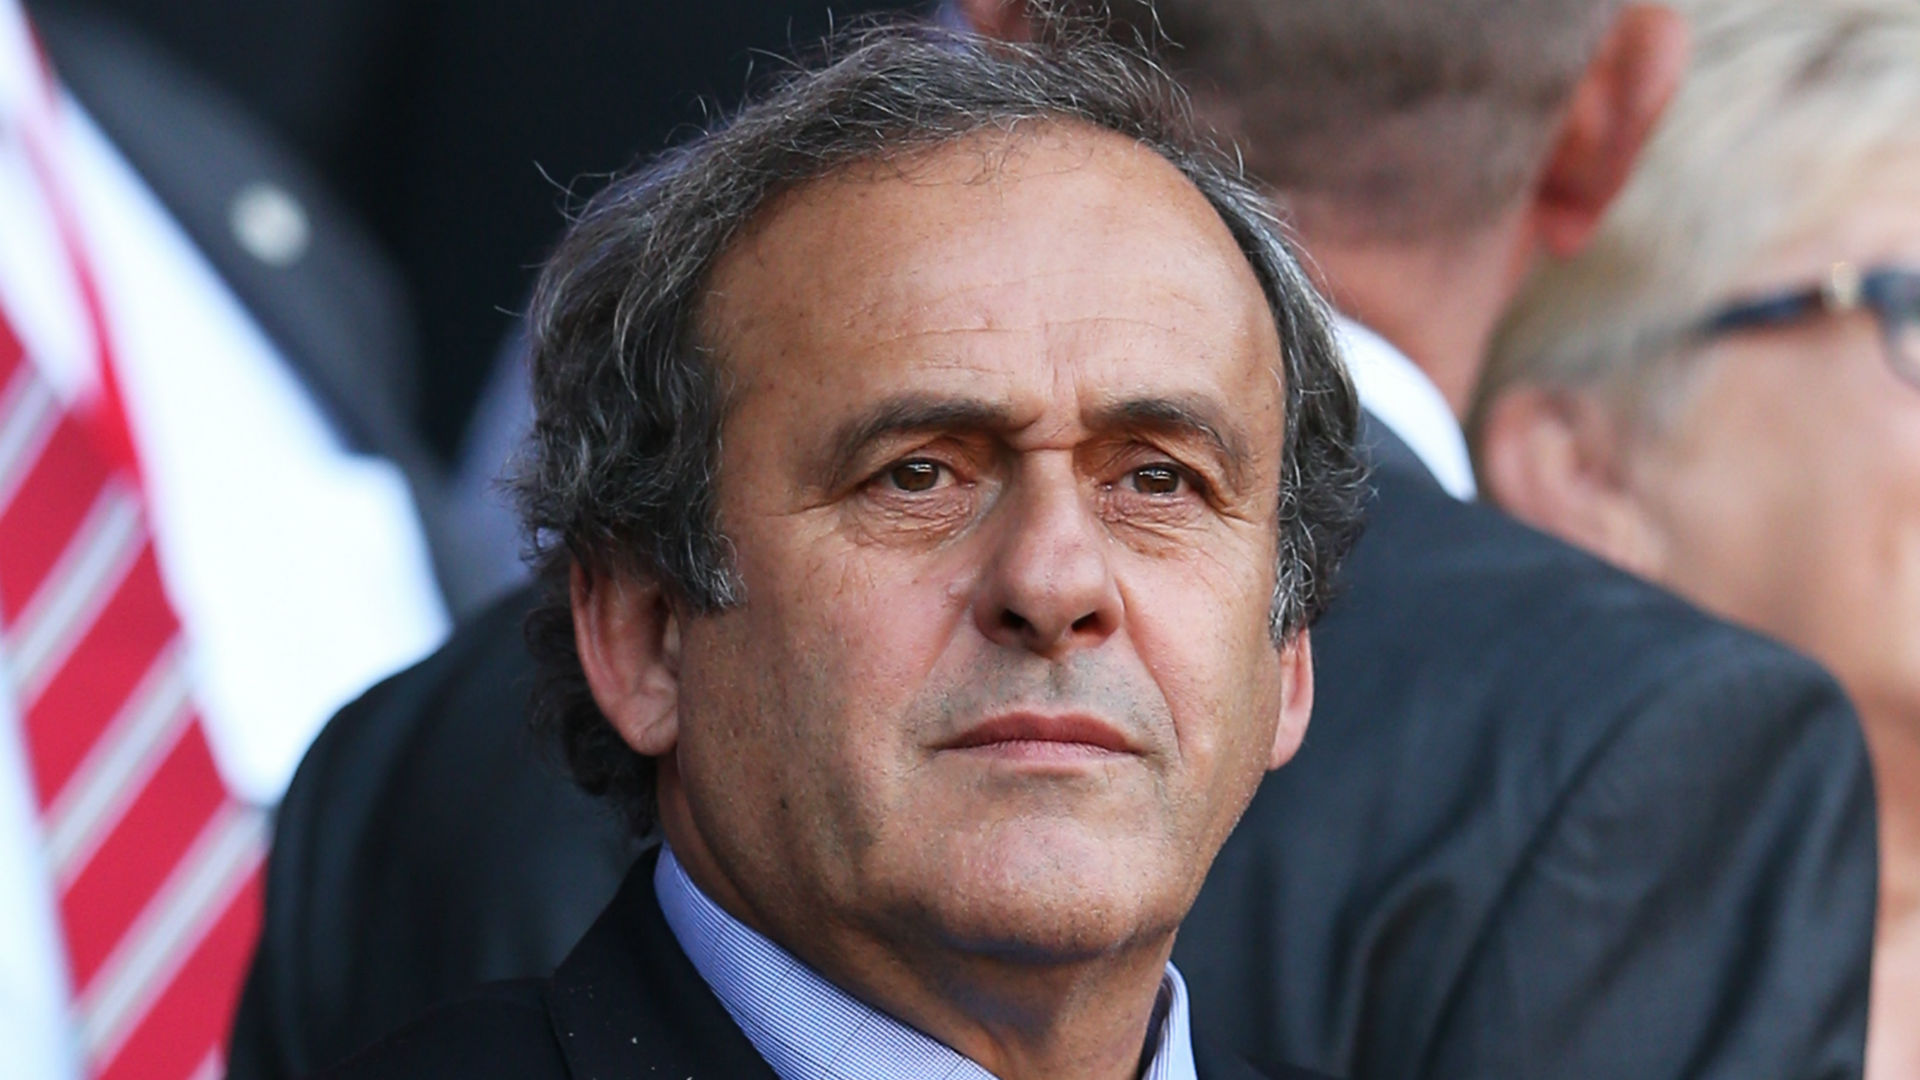 After being questioned about the decision to award the 2022 World Cup to Qatar, Michel Platini was released.